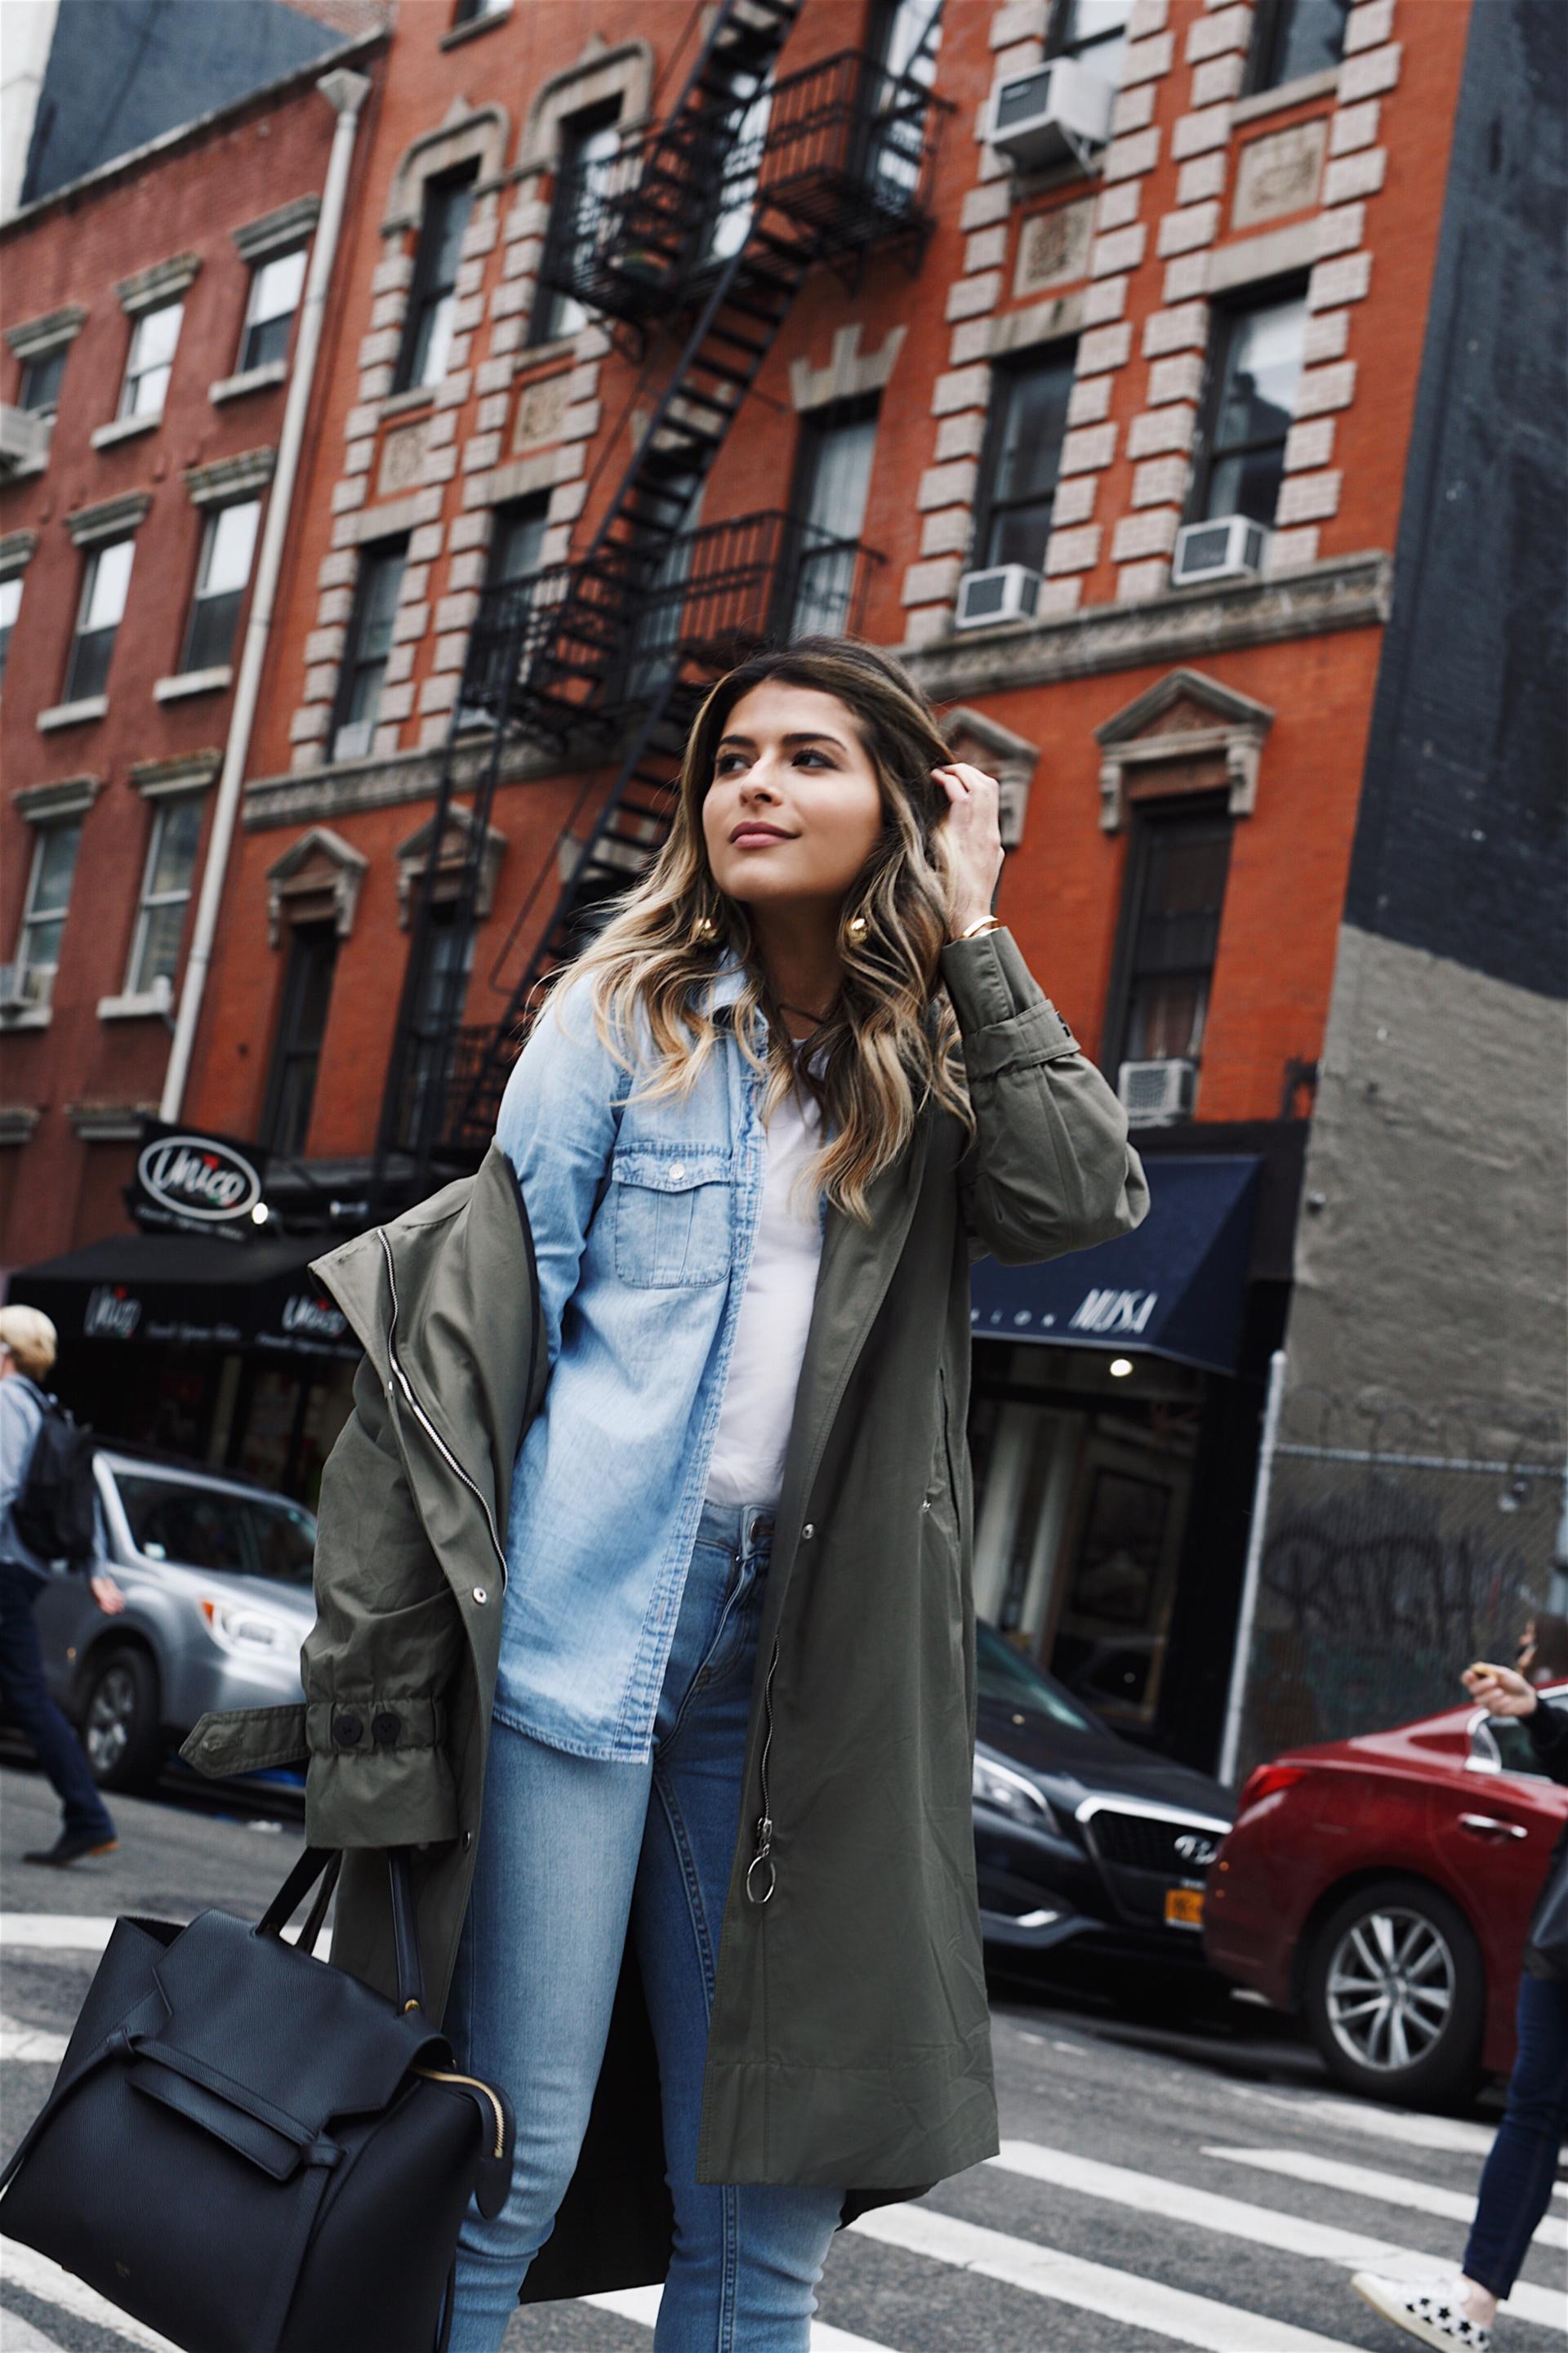 5 things I love about NYC - Pam Hetlinger - Chambray Shirt - Zara Jeans - Army green parka - Celine Belt bag // The Girl From Panama